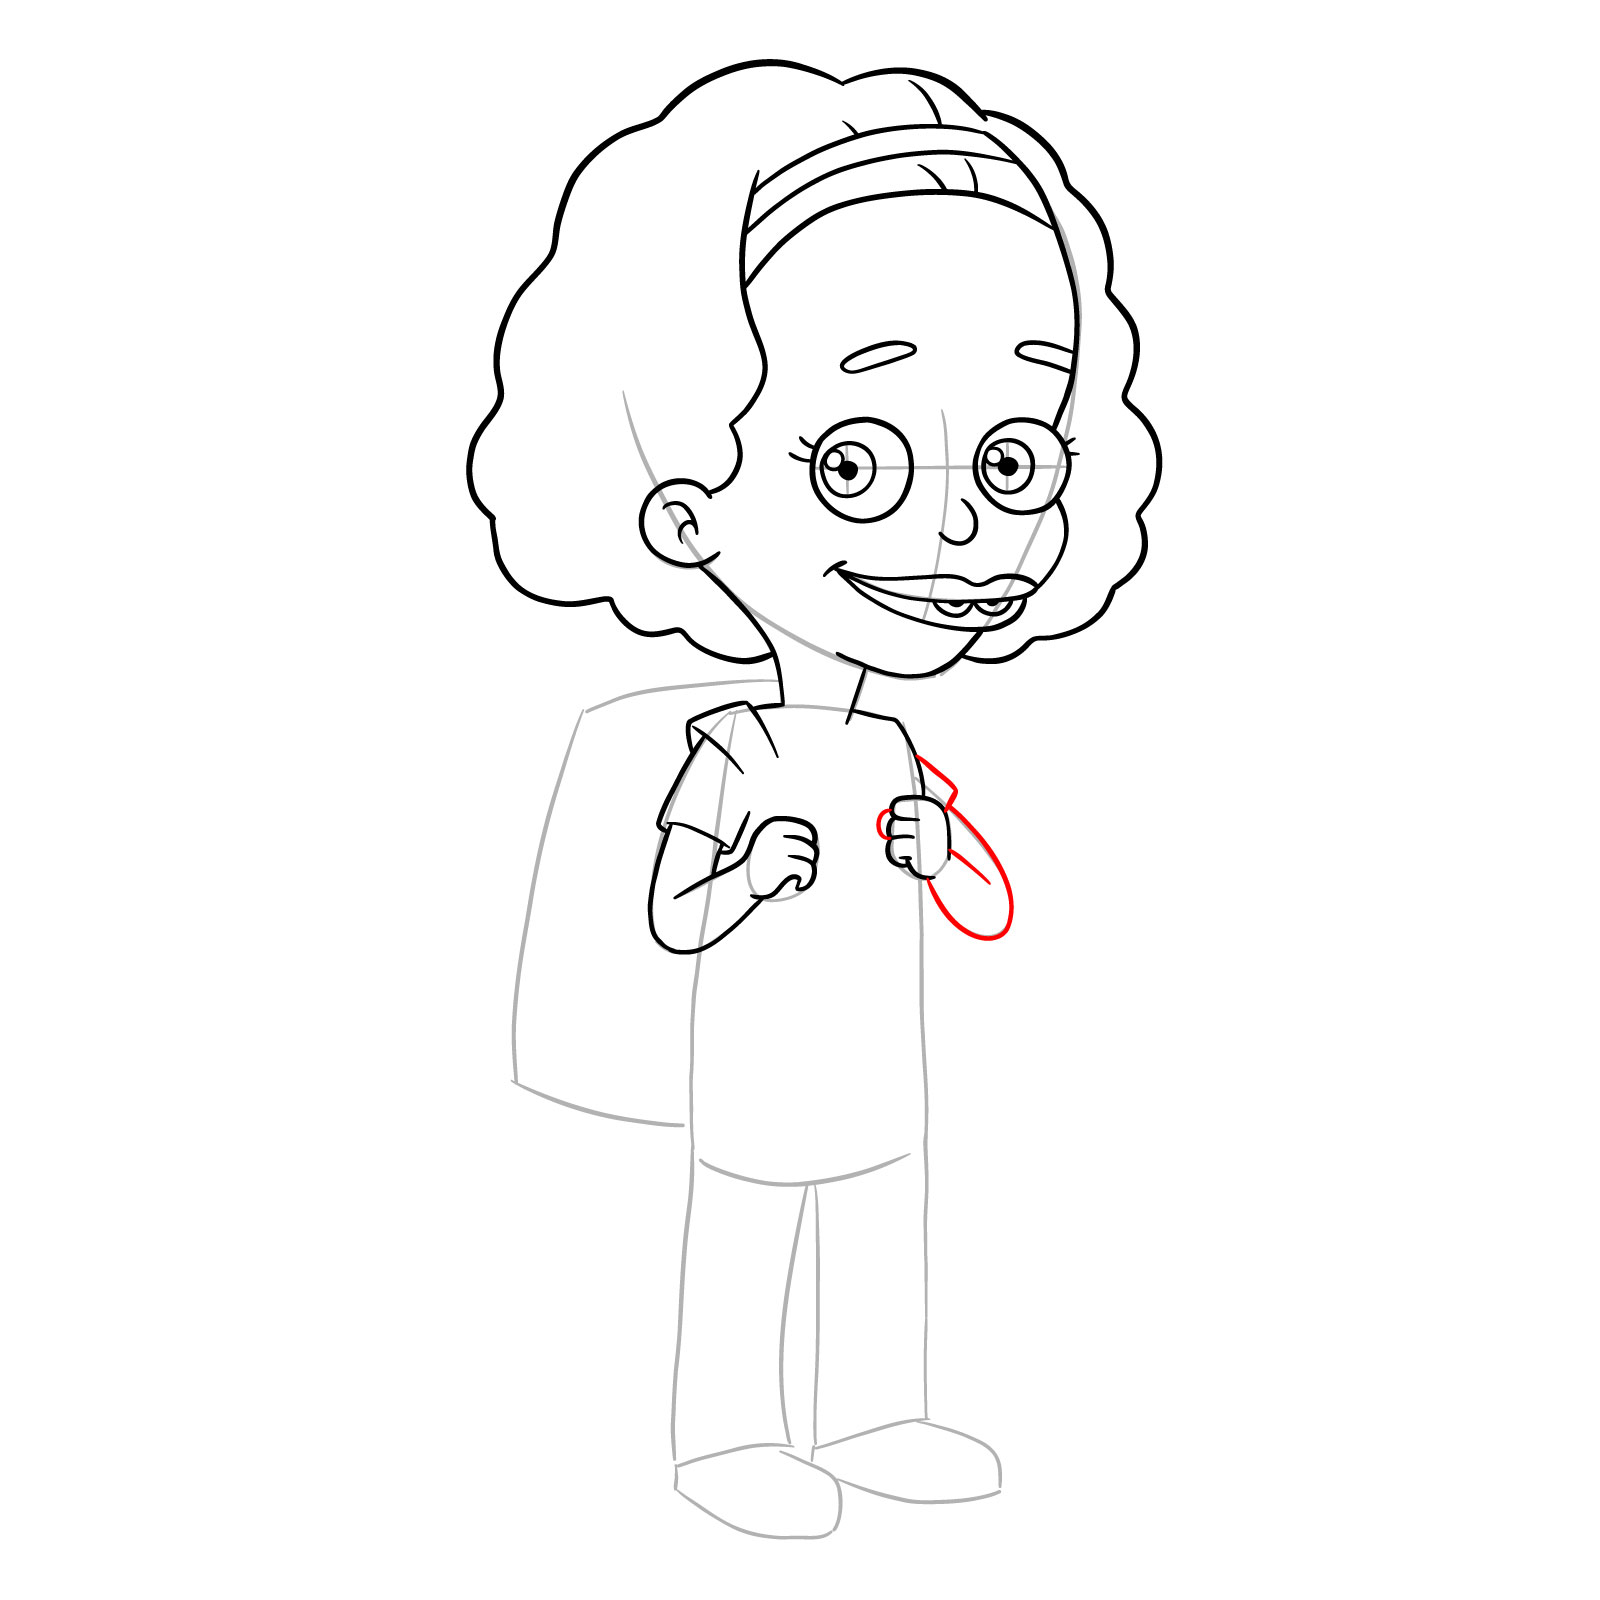 How to draw Missy from Big Mouth - step 17